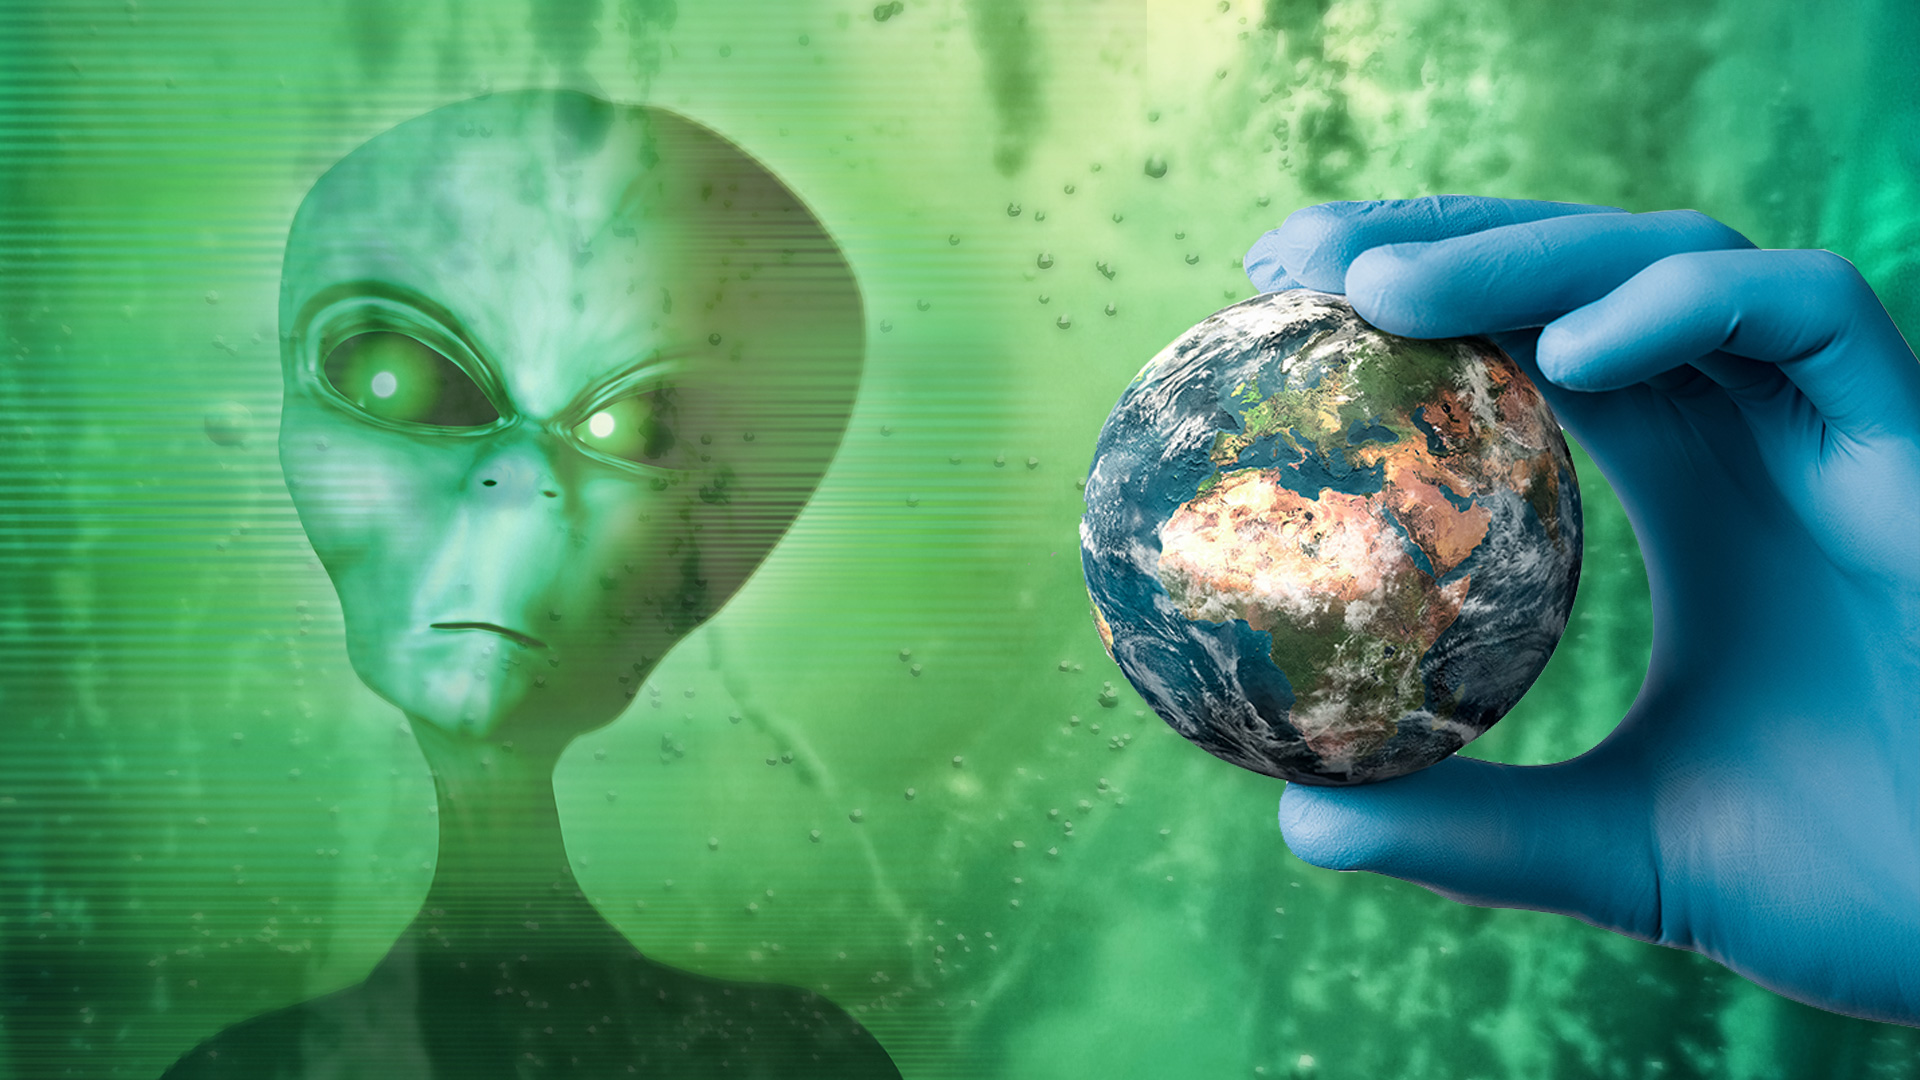 Aliens may have created our universe in a secret space lab, top professor claims